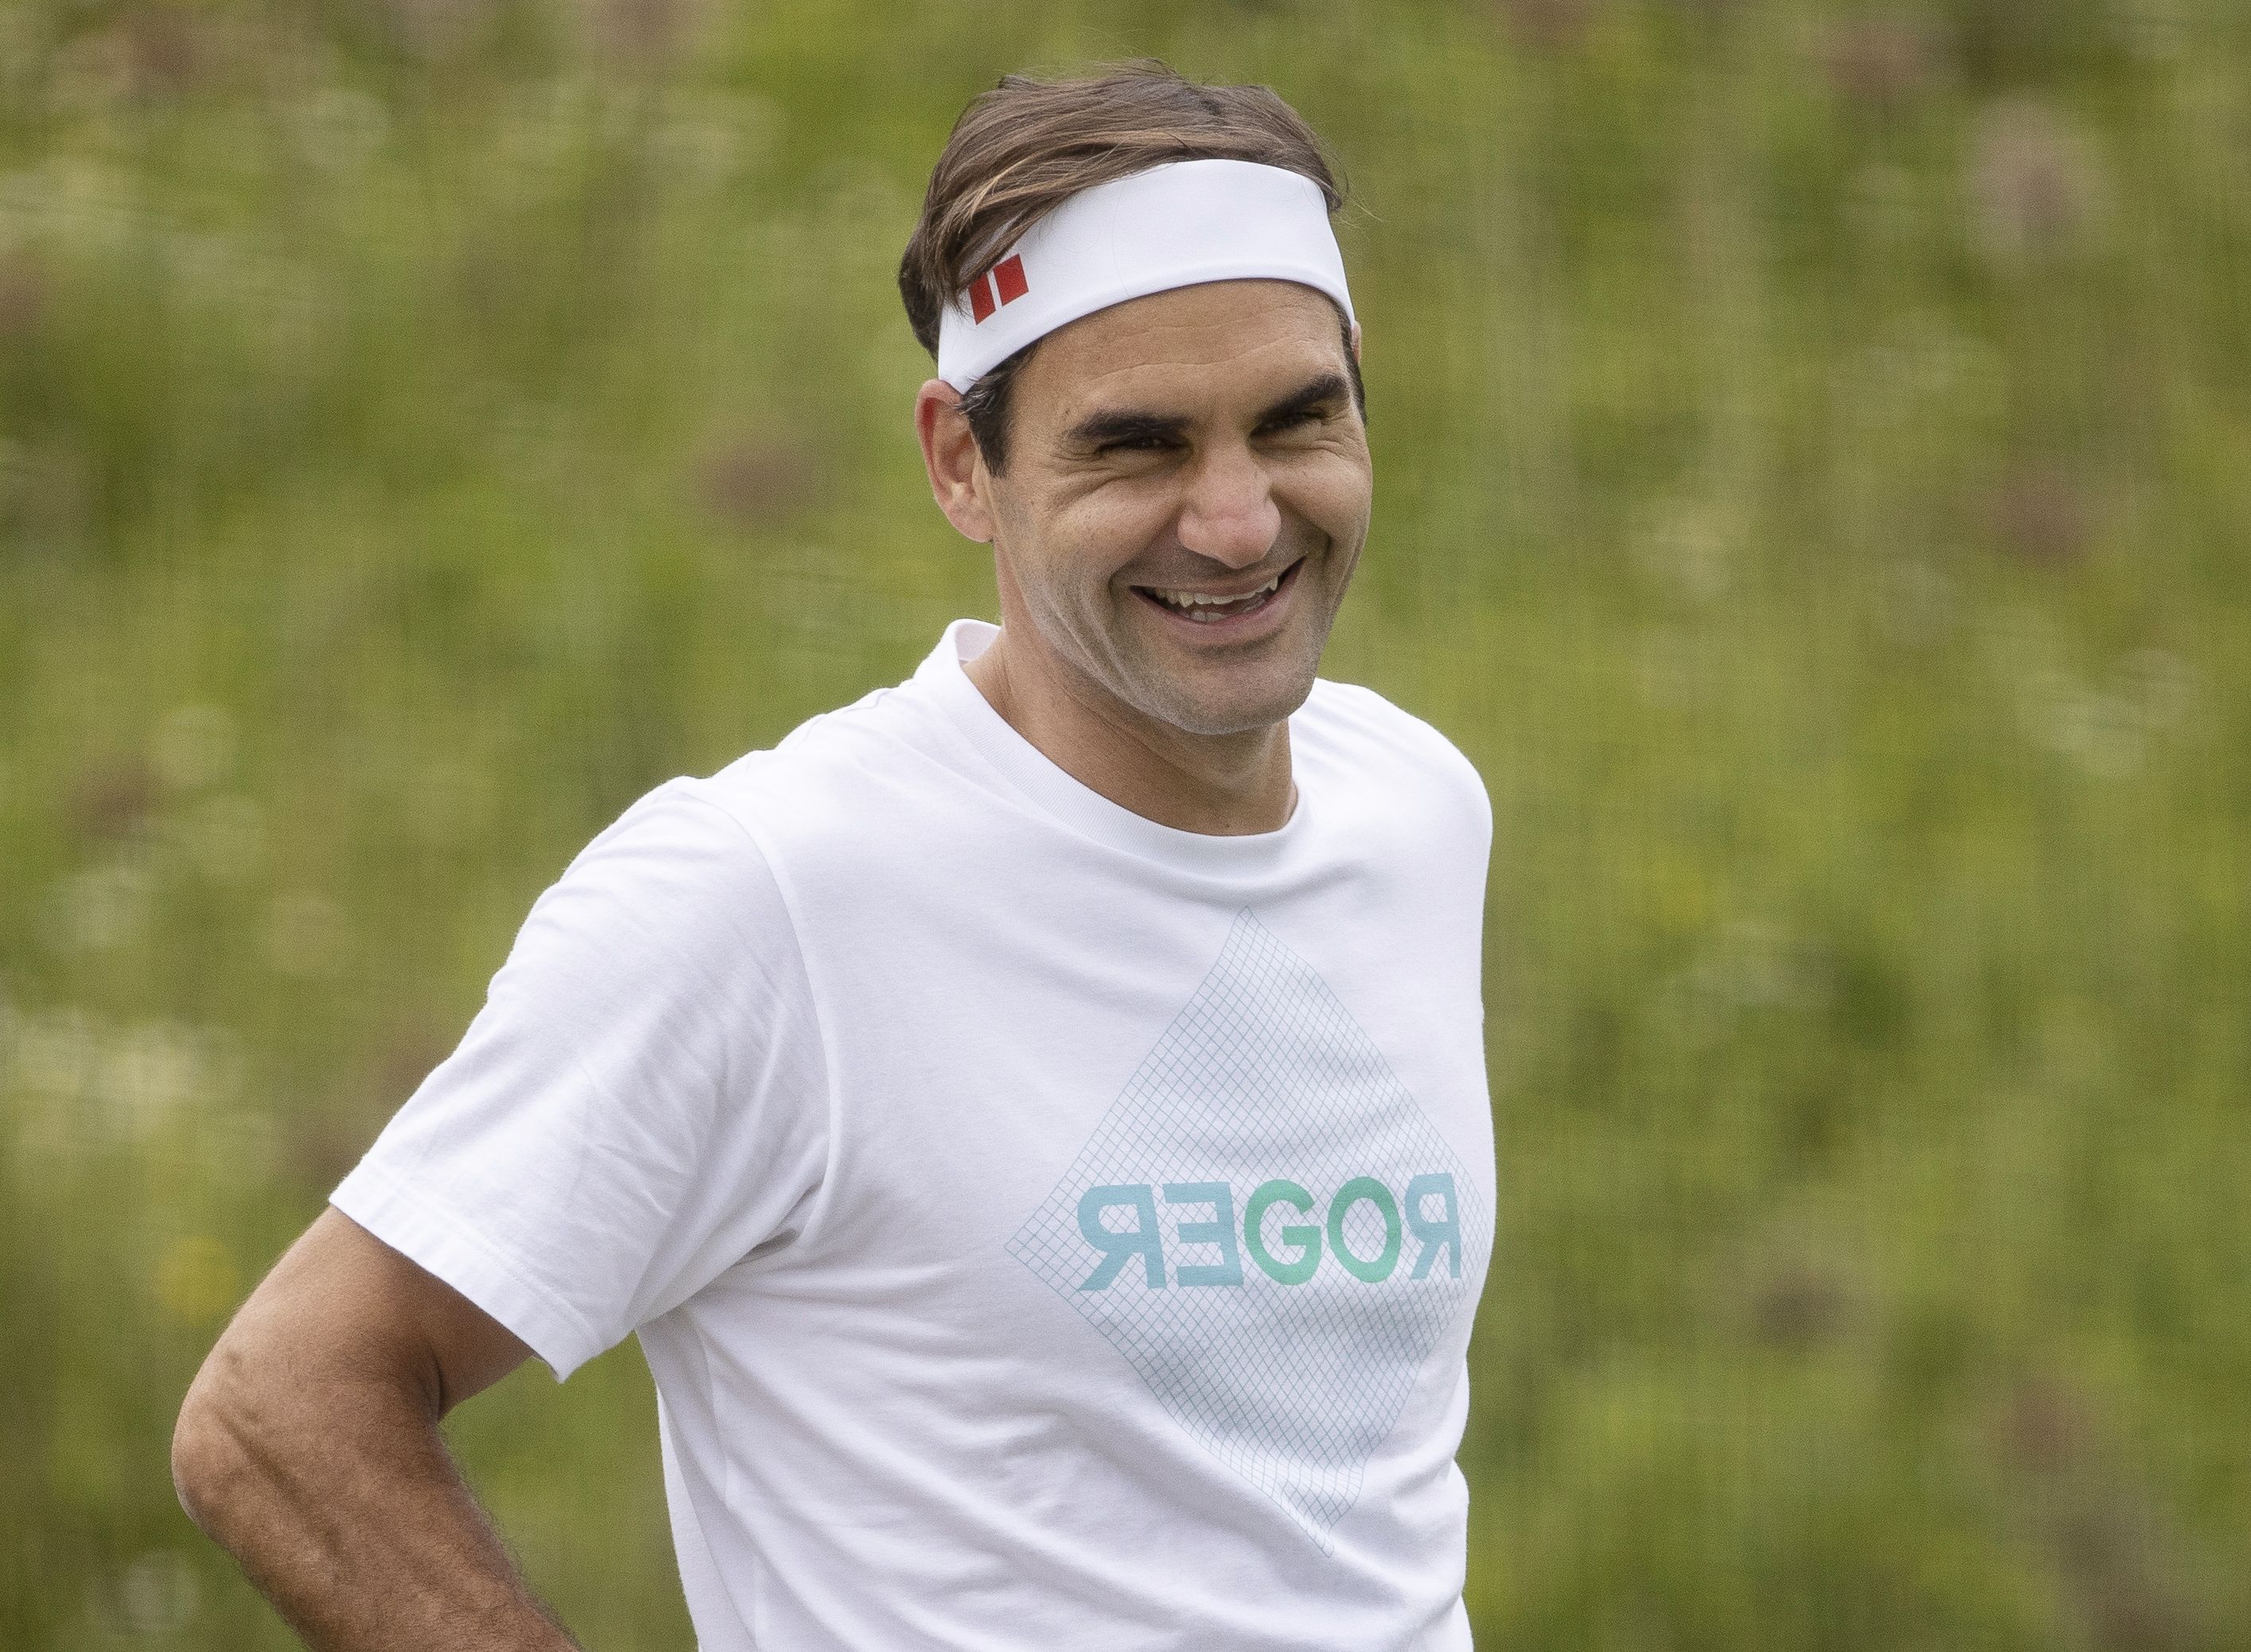 Roger Federer announced that he will make a major financial